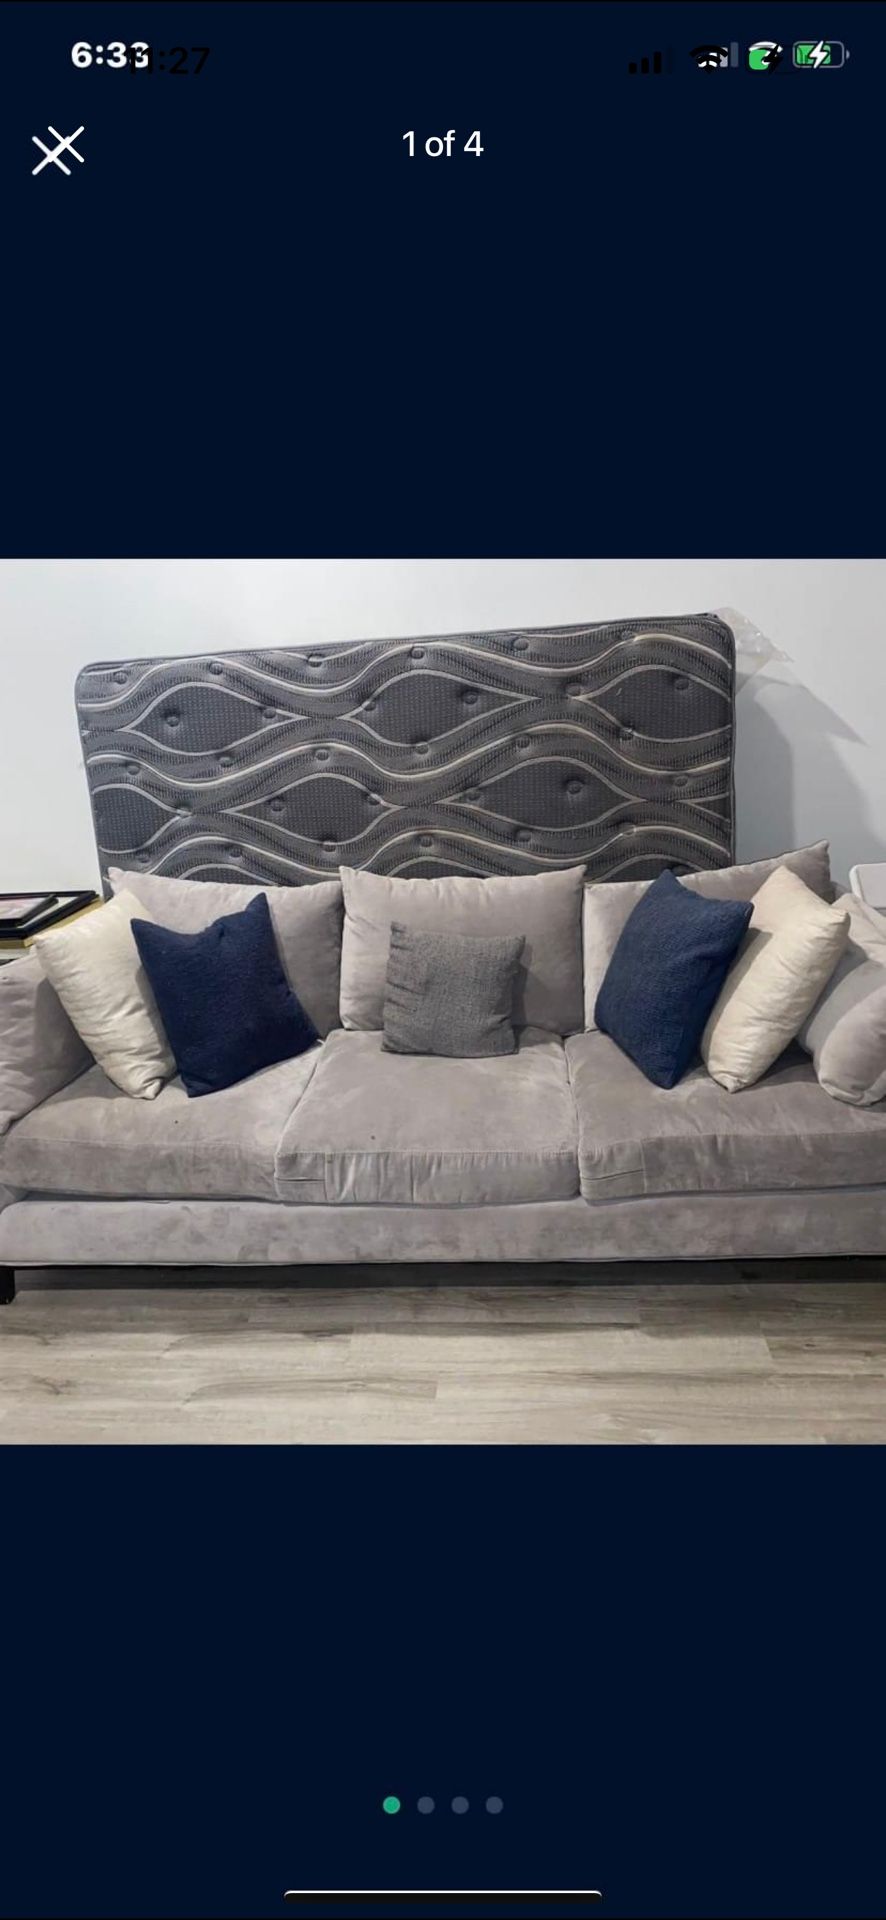 GRAY COUCH